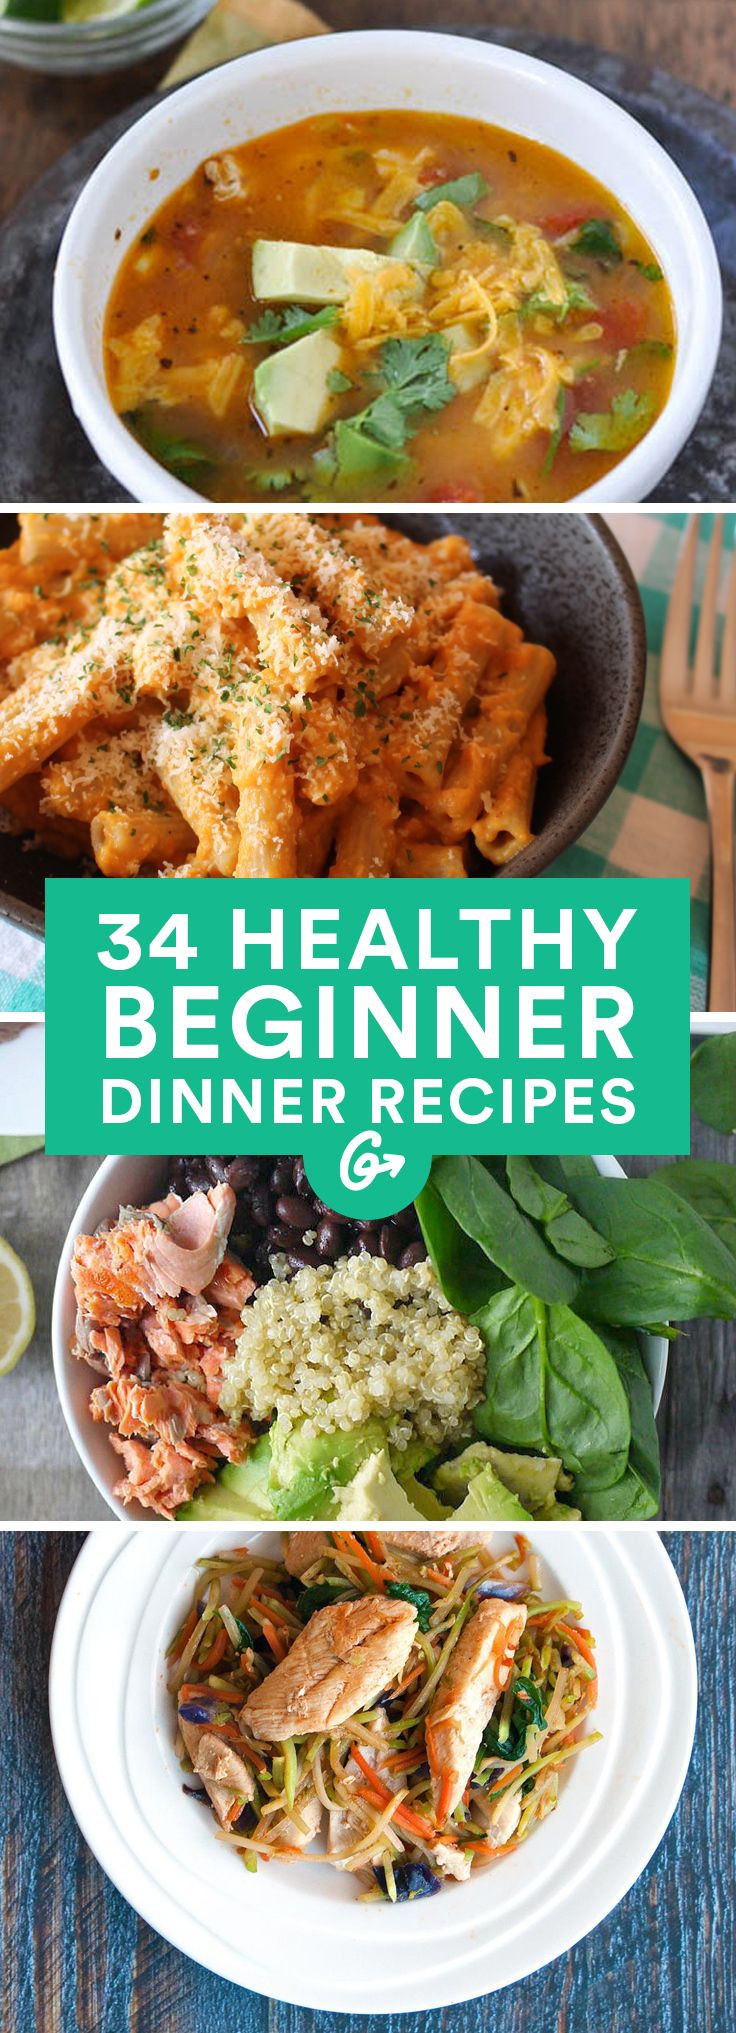 Super Easy Healthy Dinners
 34 Healthy Dinner Recipes Anyone Can Make